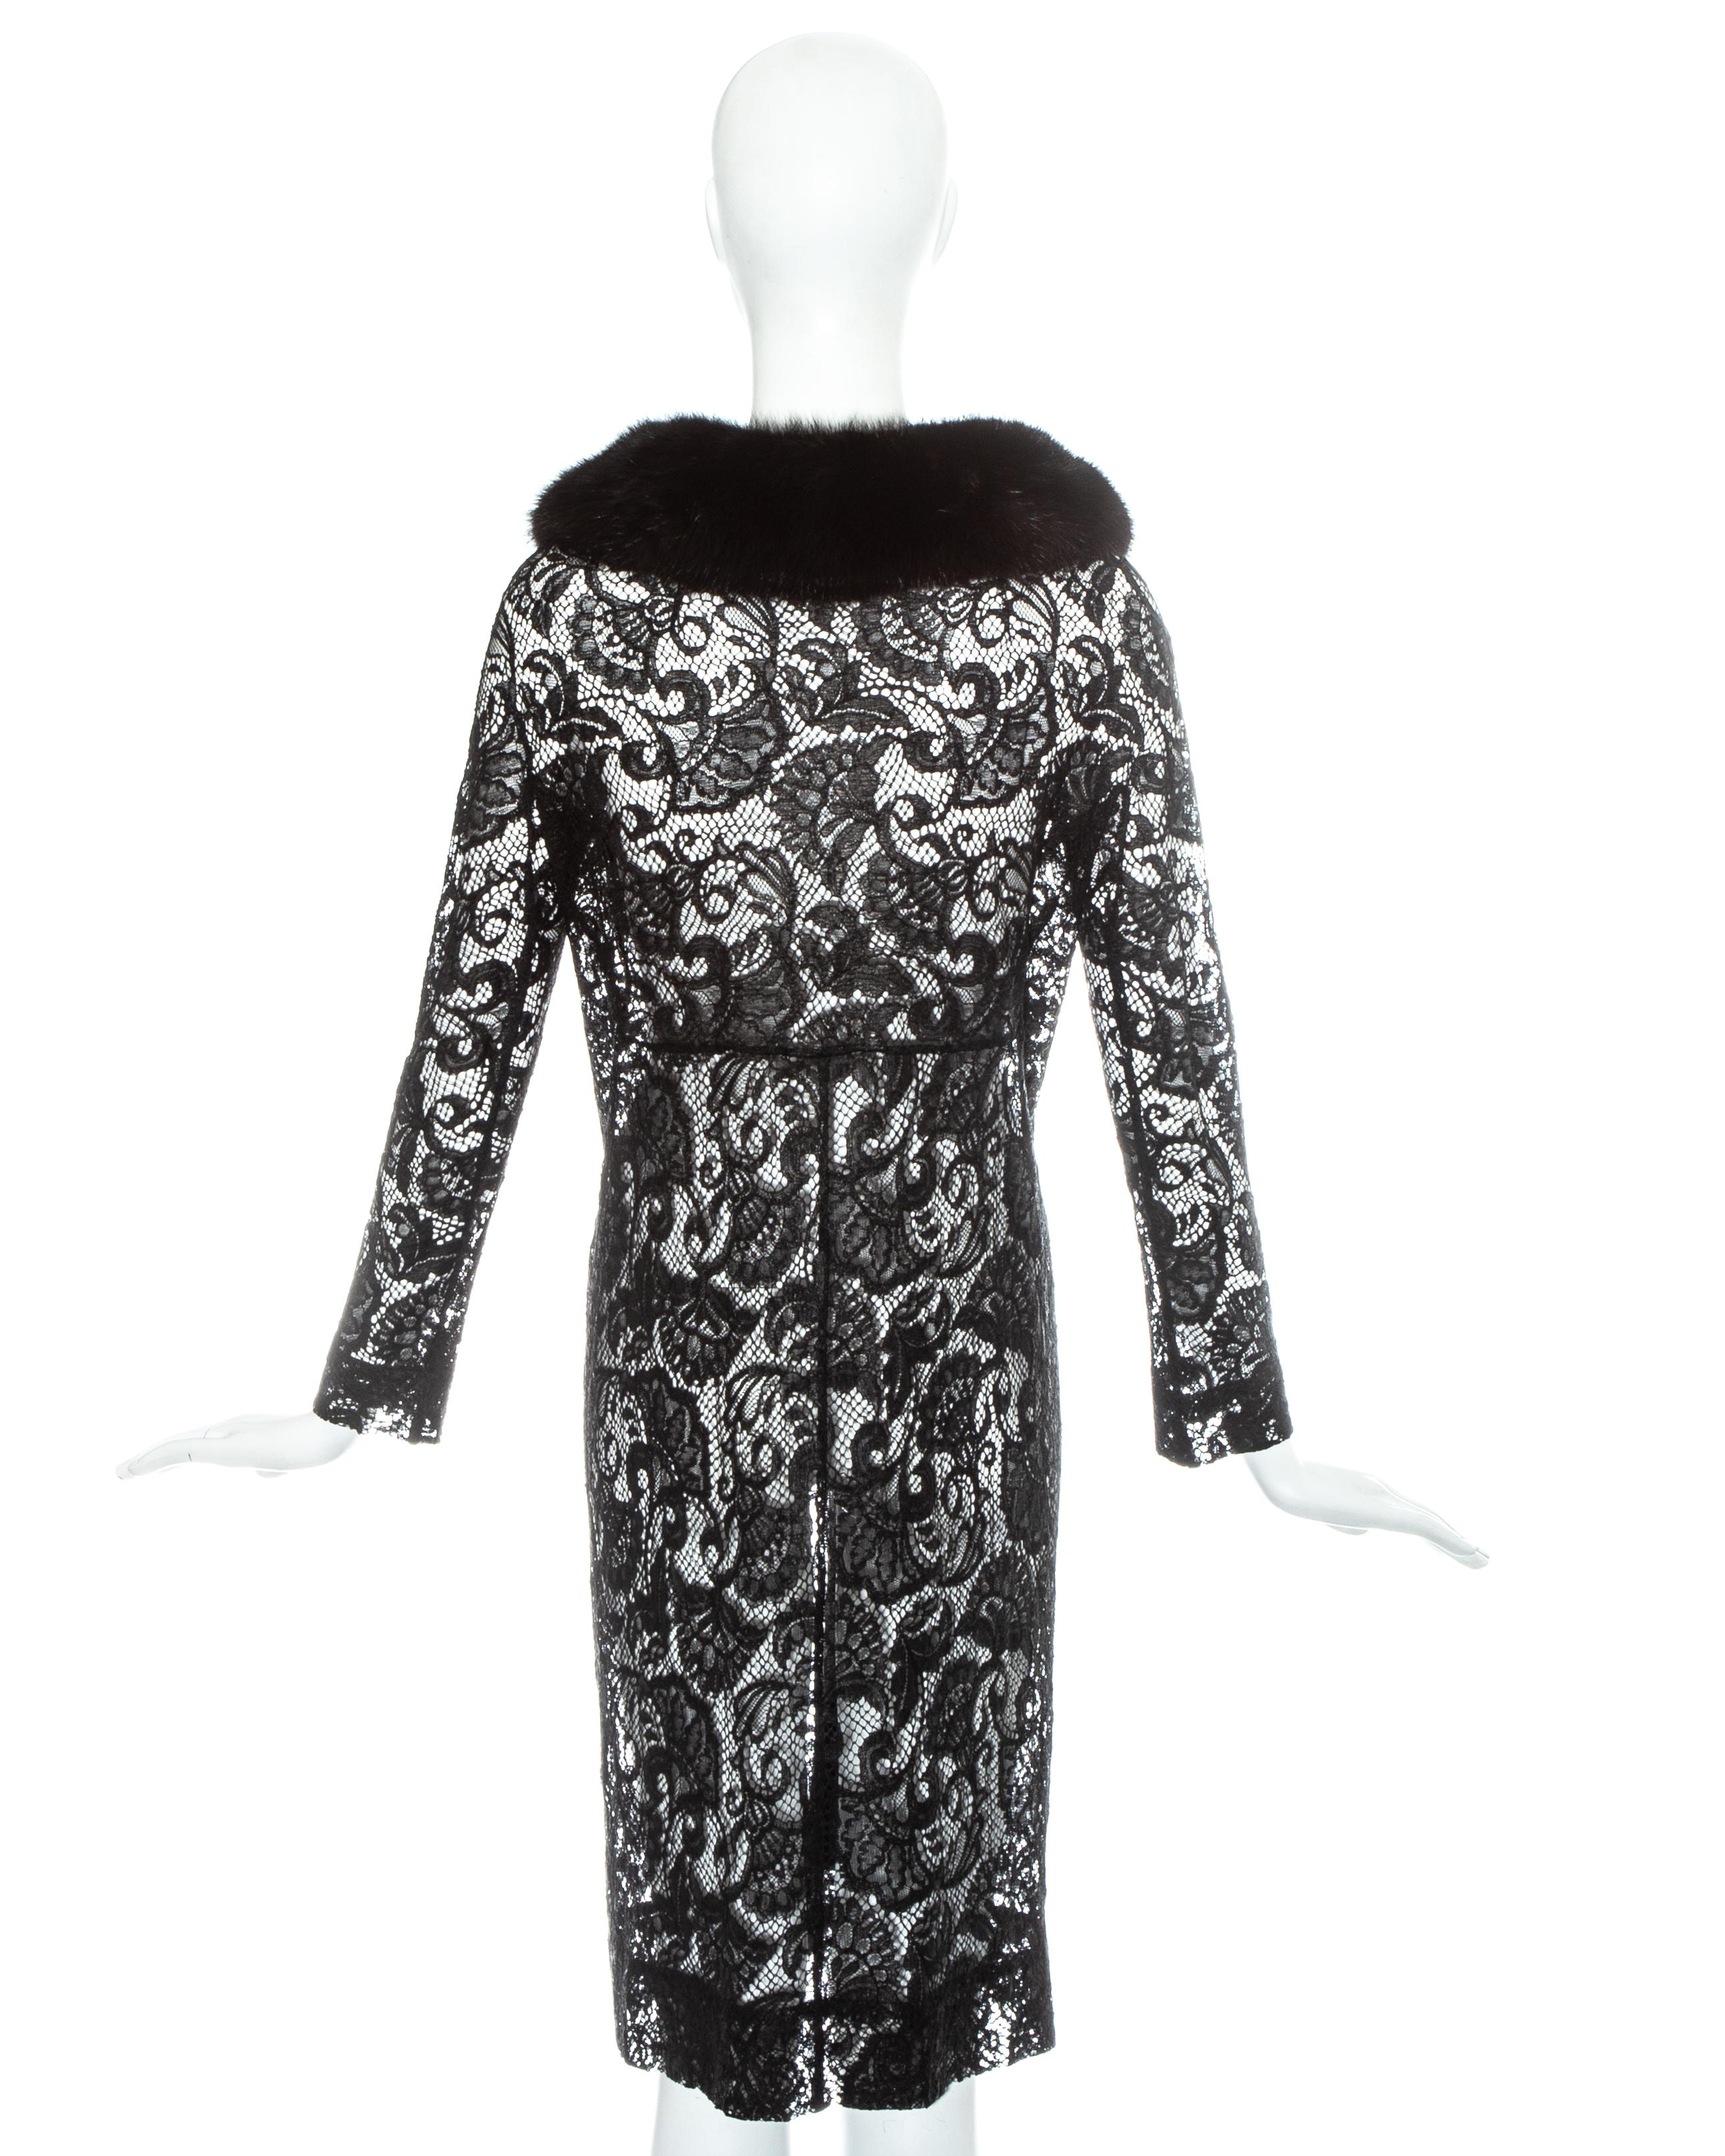 Dolce & Gabbana black lace evening coat with mink fur collar, fw 1997 In Excellent Condition For Sale In London, GB